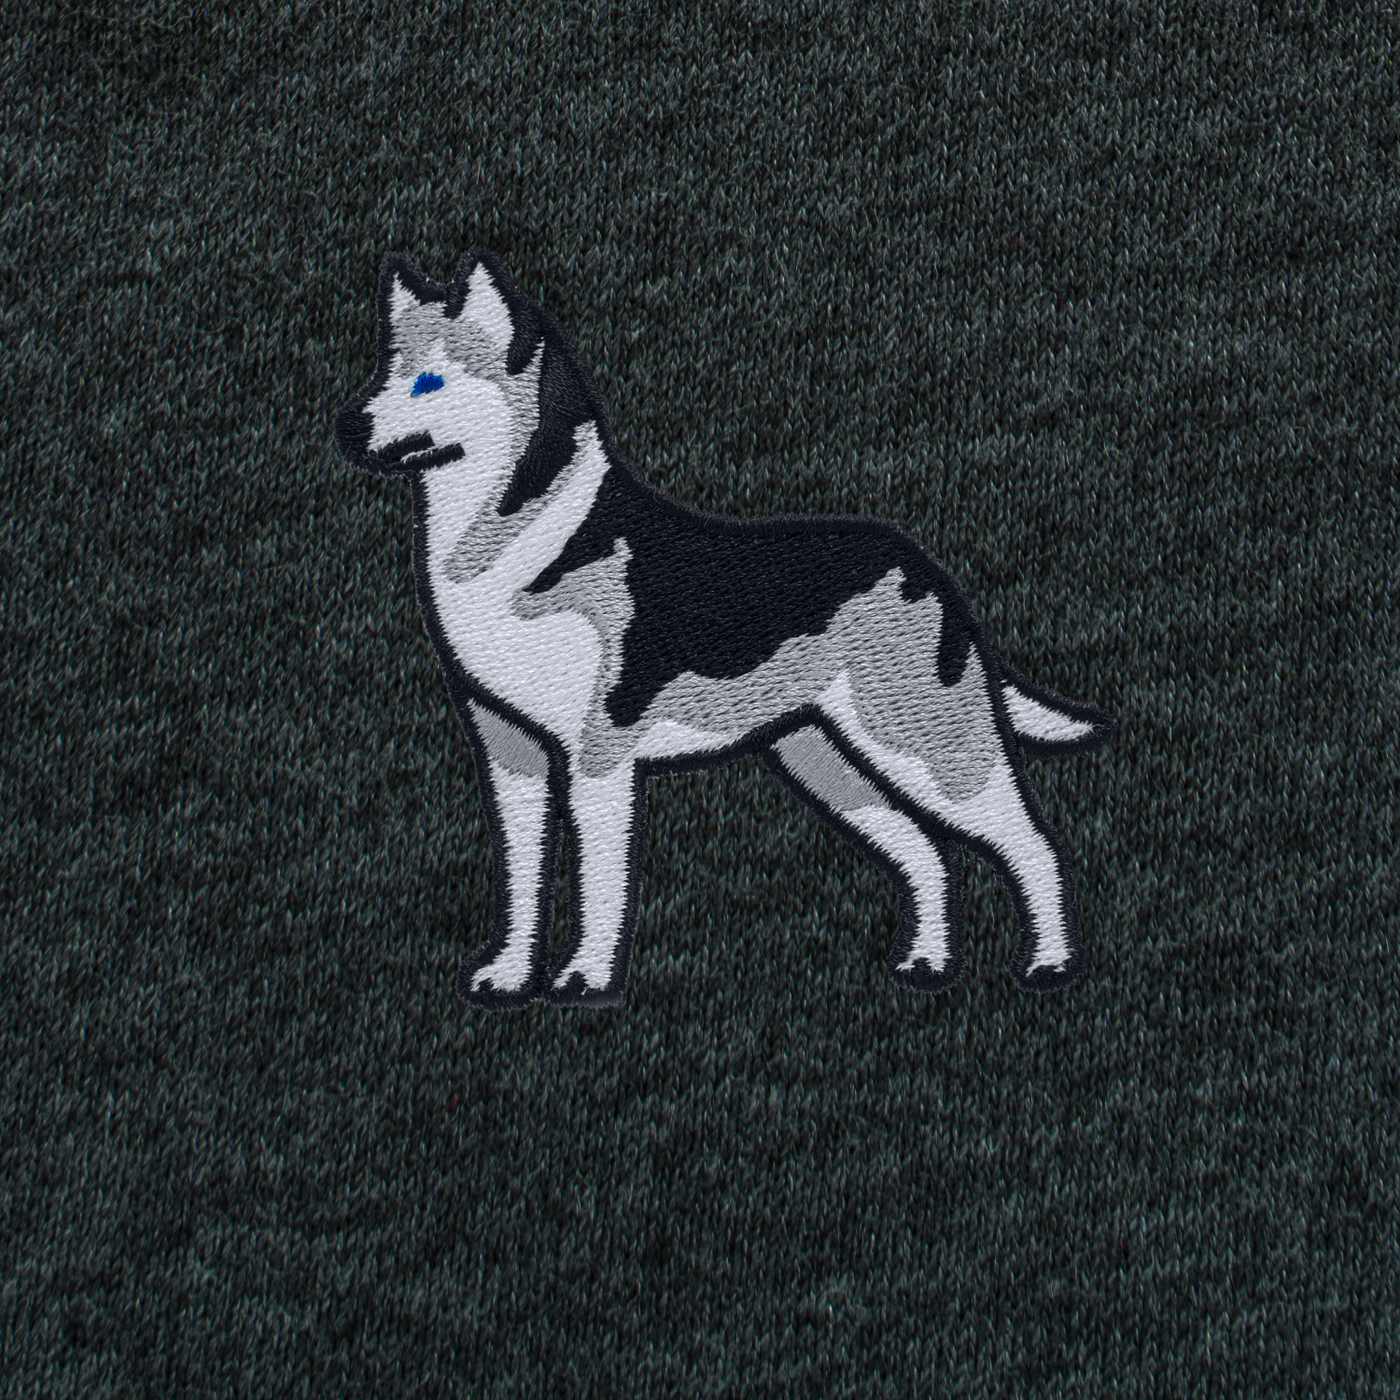 Bobby's Planet Men's Embroidered Siberian Husky T-Shirt from Paws Dog Cat Animals Collection in Dark Grey Heather Color#color_dark-grey-heather